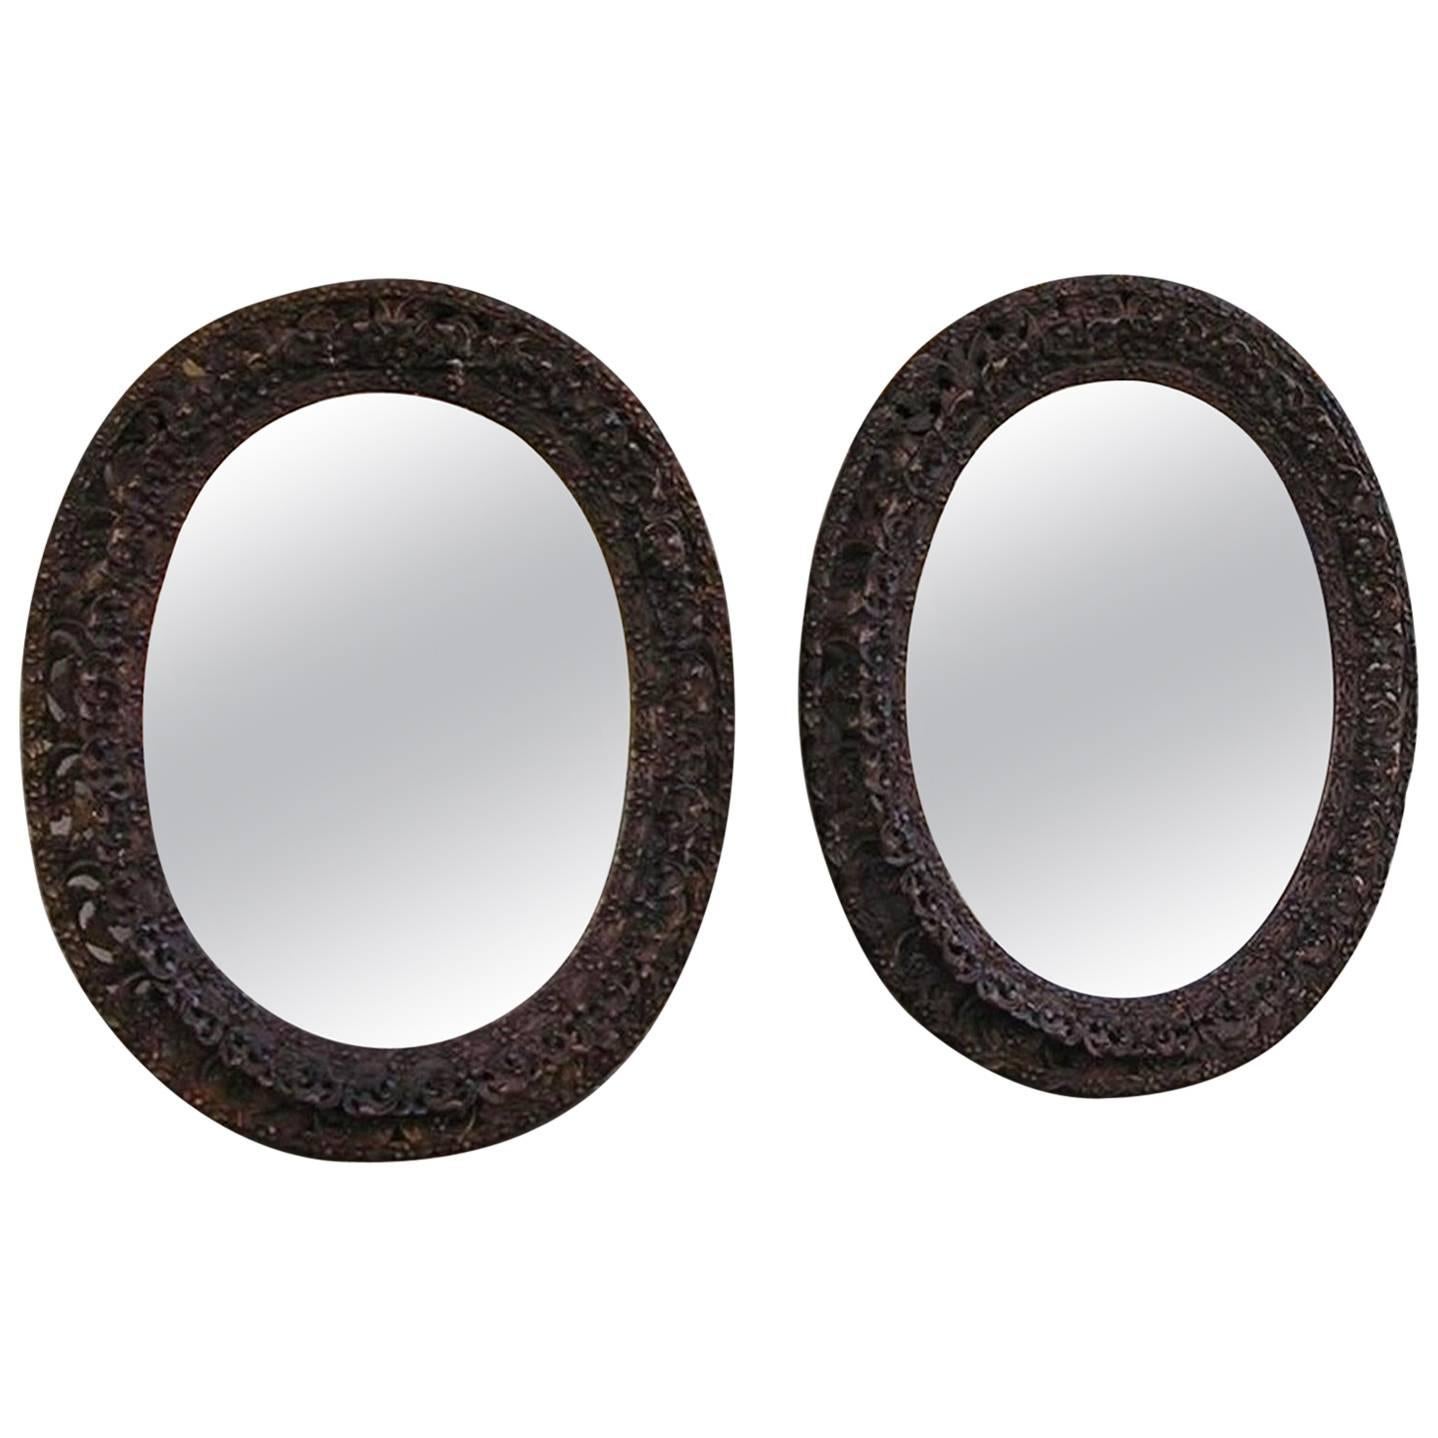 Pair of Anglo-Indian Mahogany Floral Carved Oval Mirrors, Circa 1810 For Sale